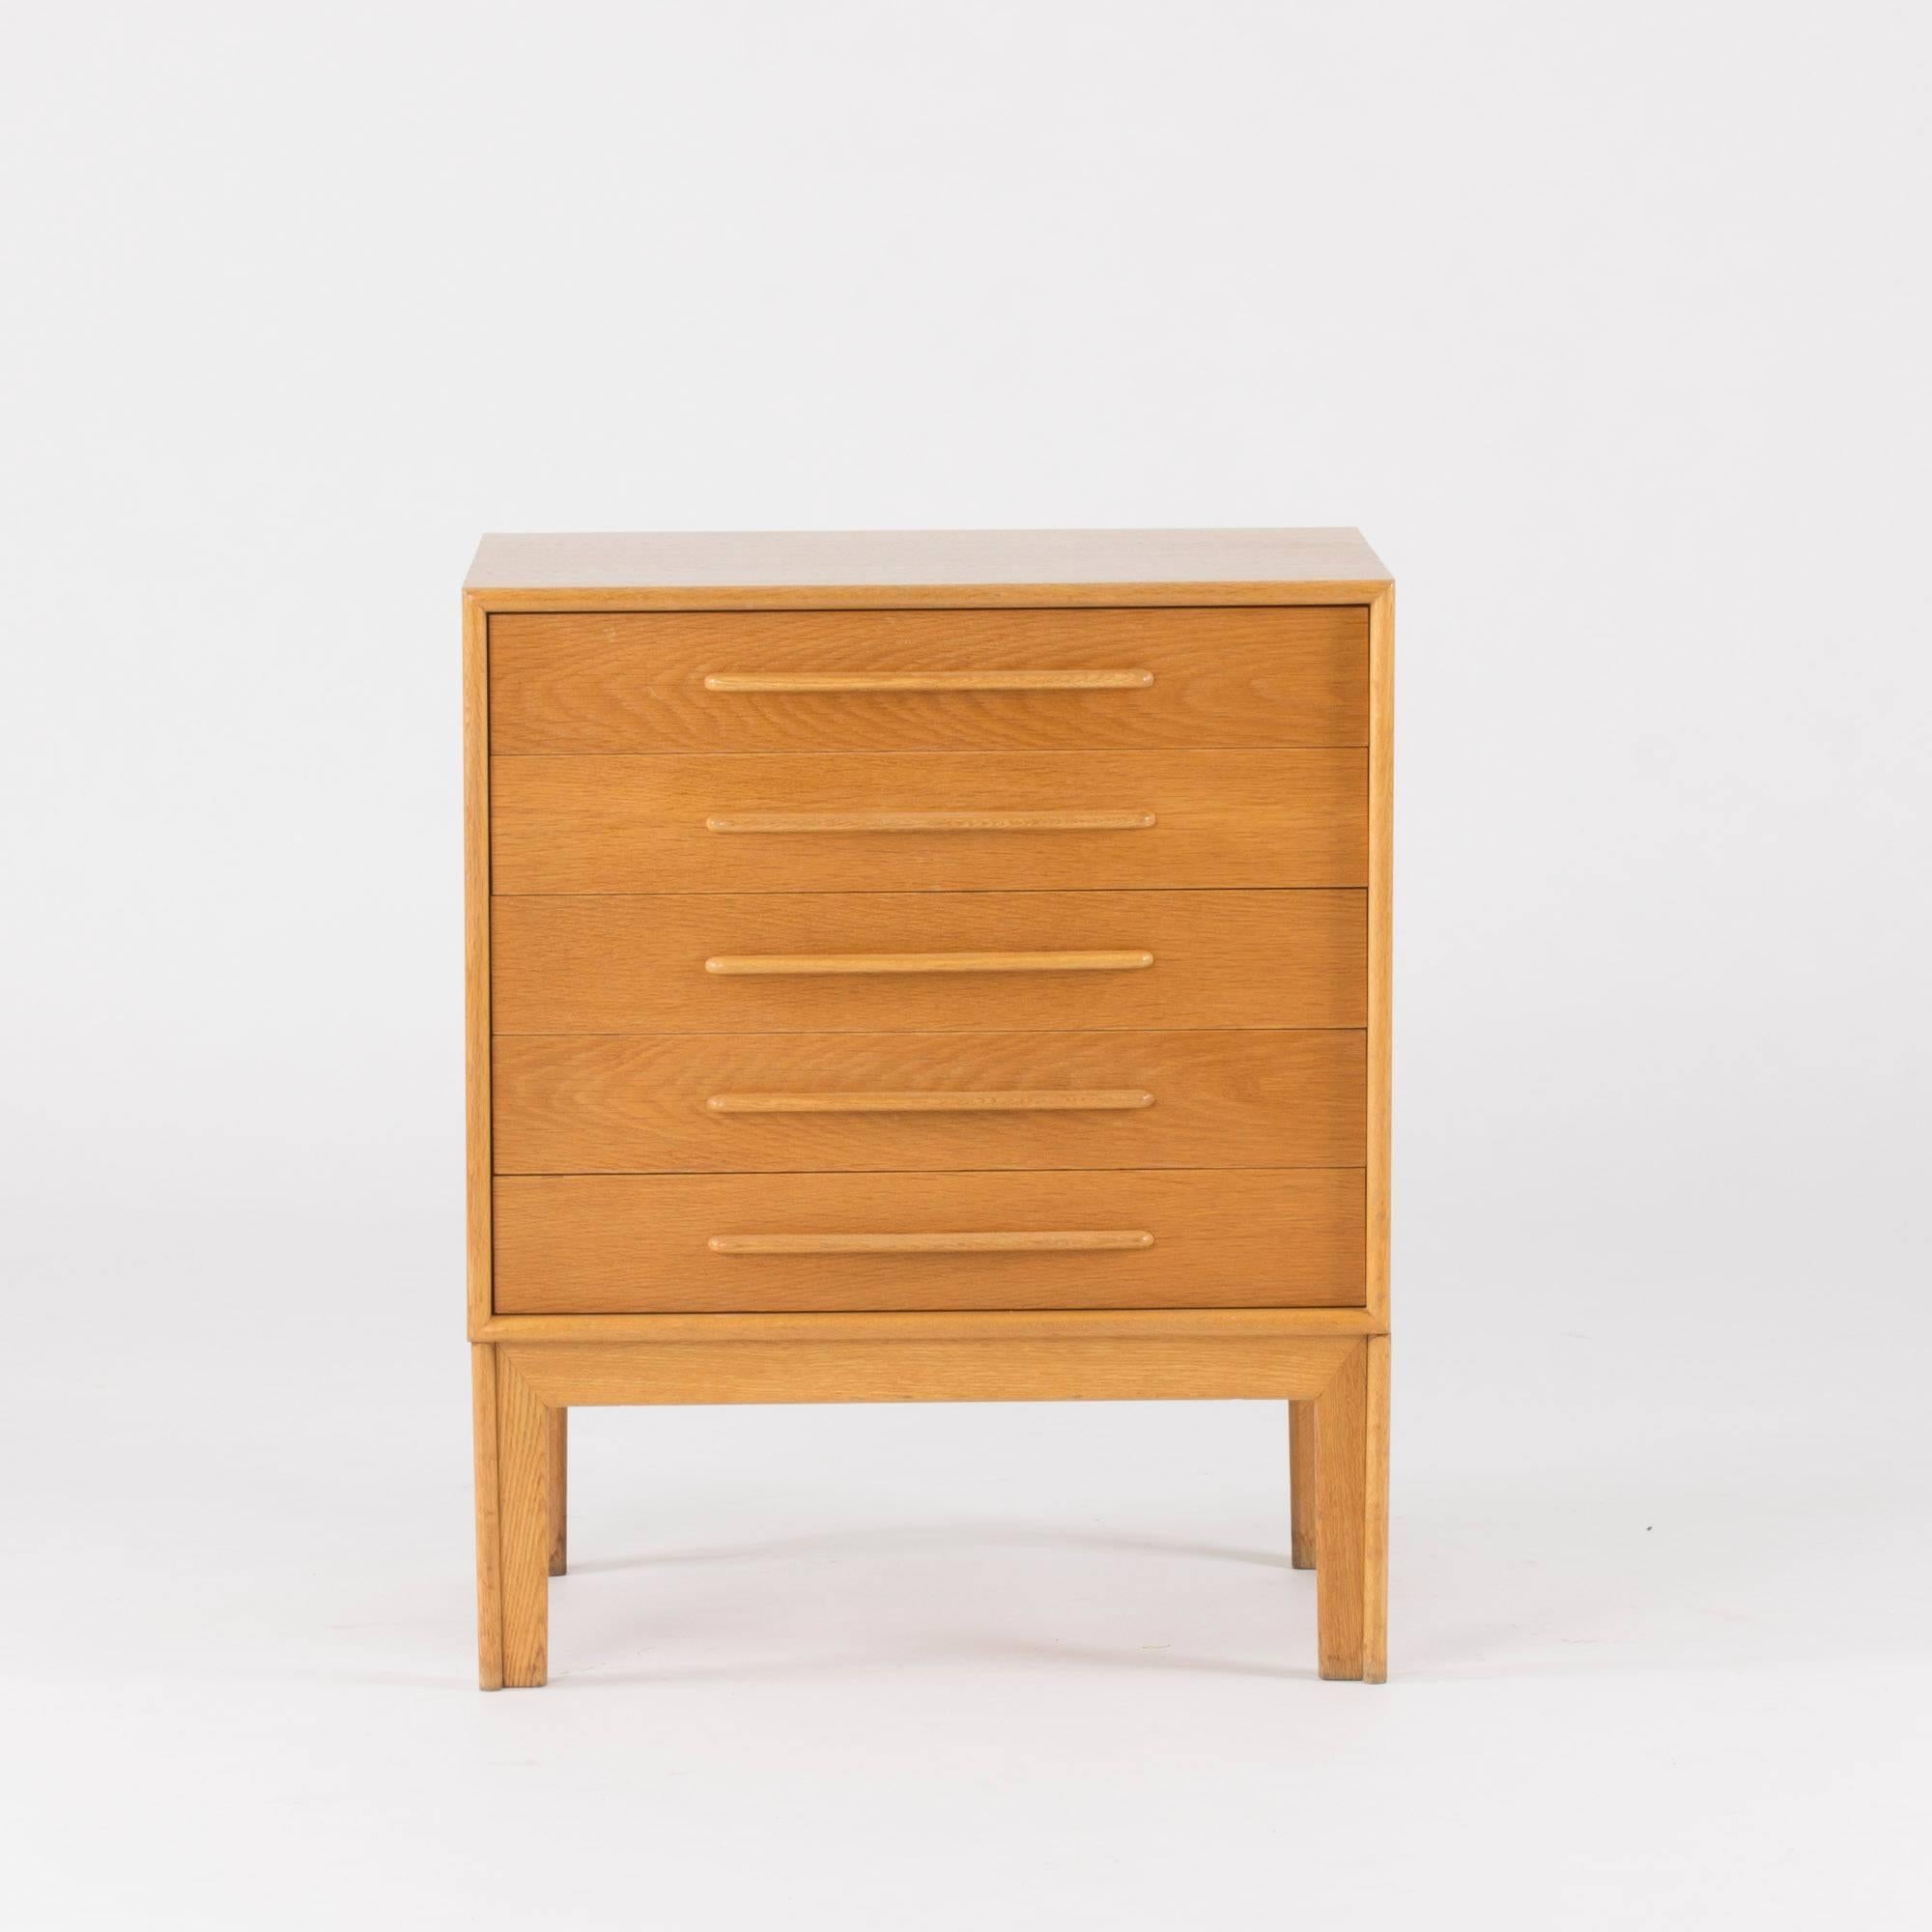 Oak chest of drawers by Alf Svensson with five drawers. Nicely sculpted legs and great handles that are hollowed out from underneath for a perfect grip.